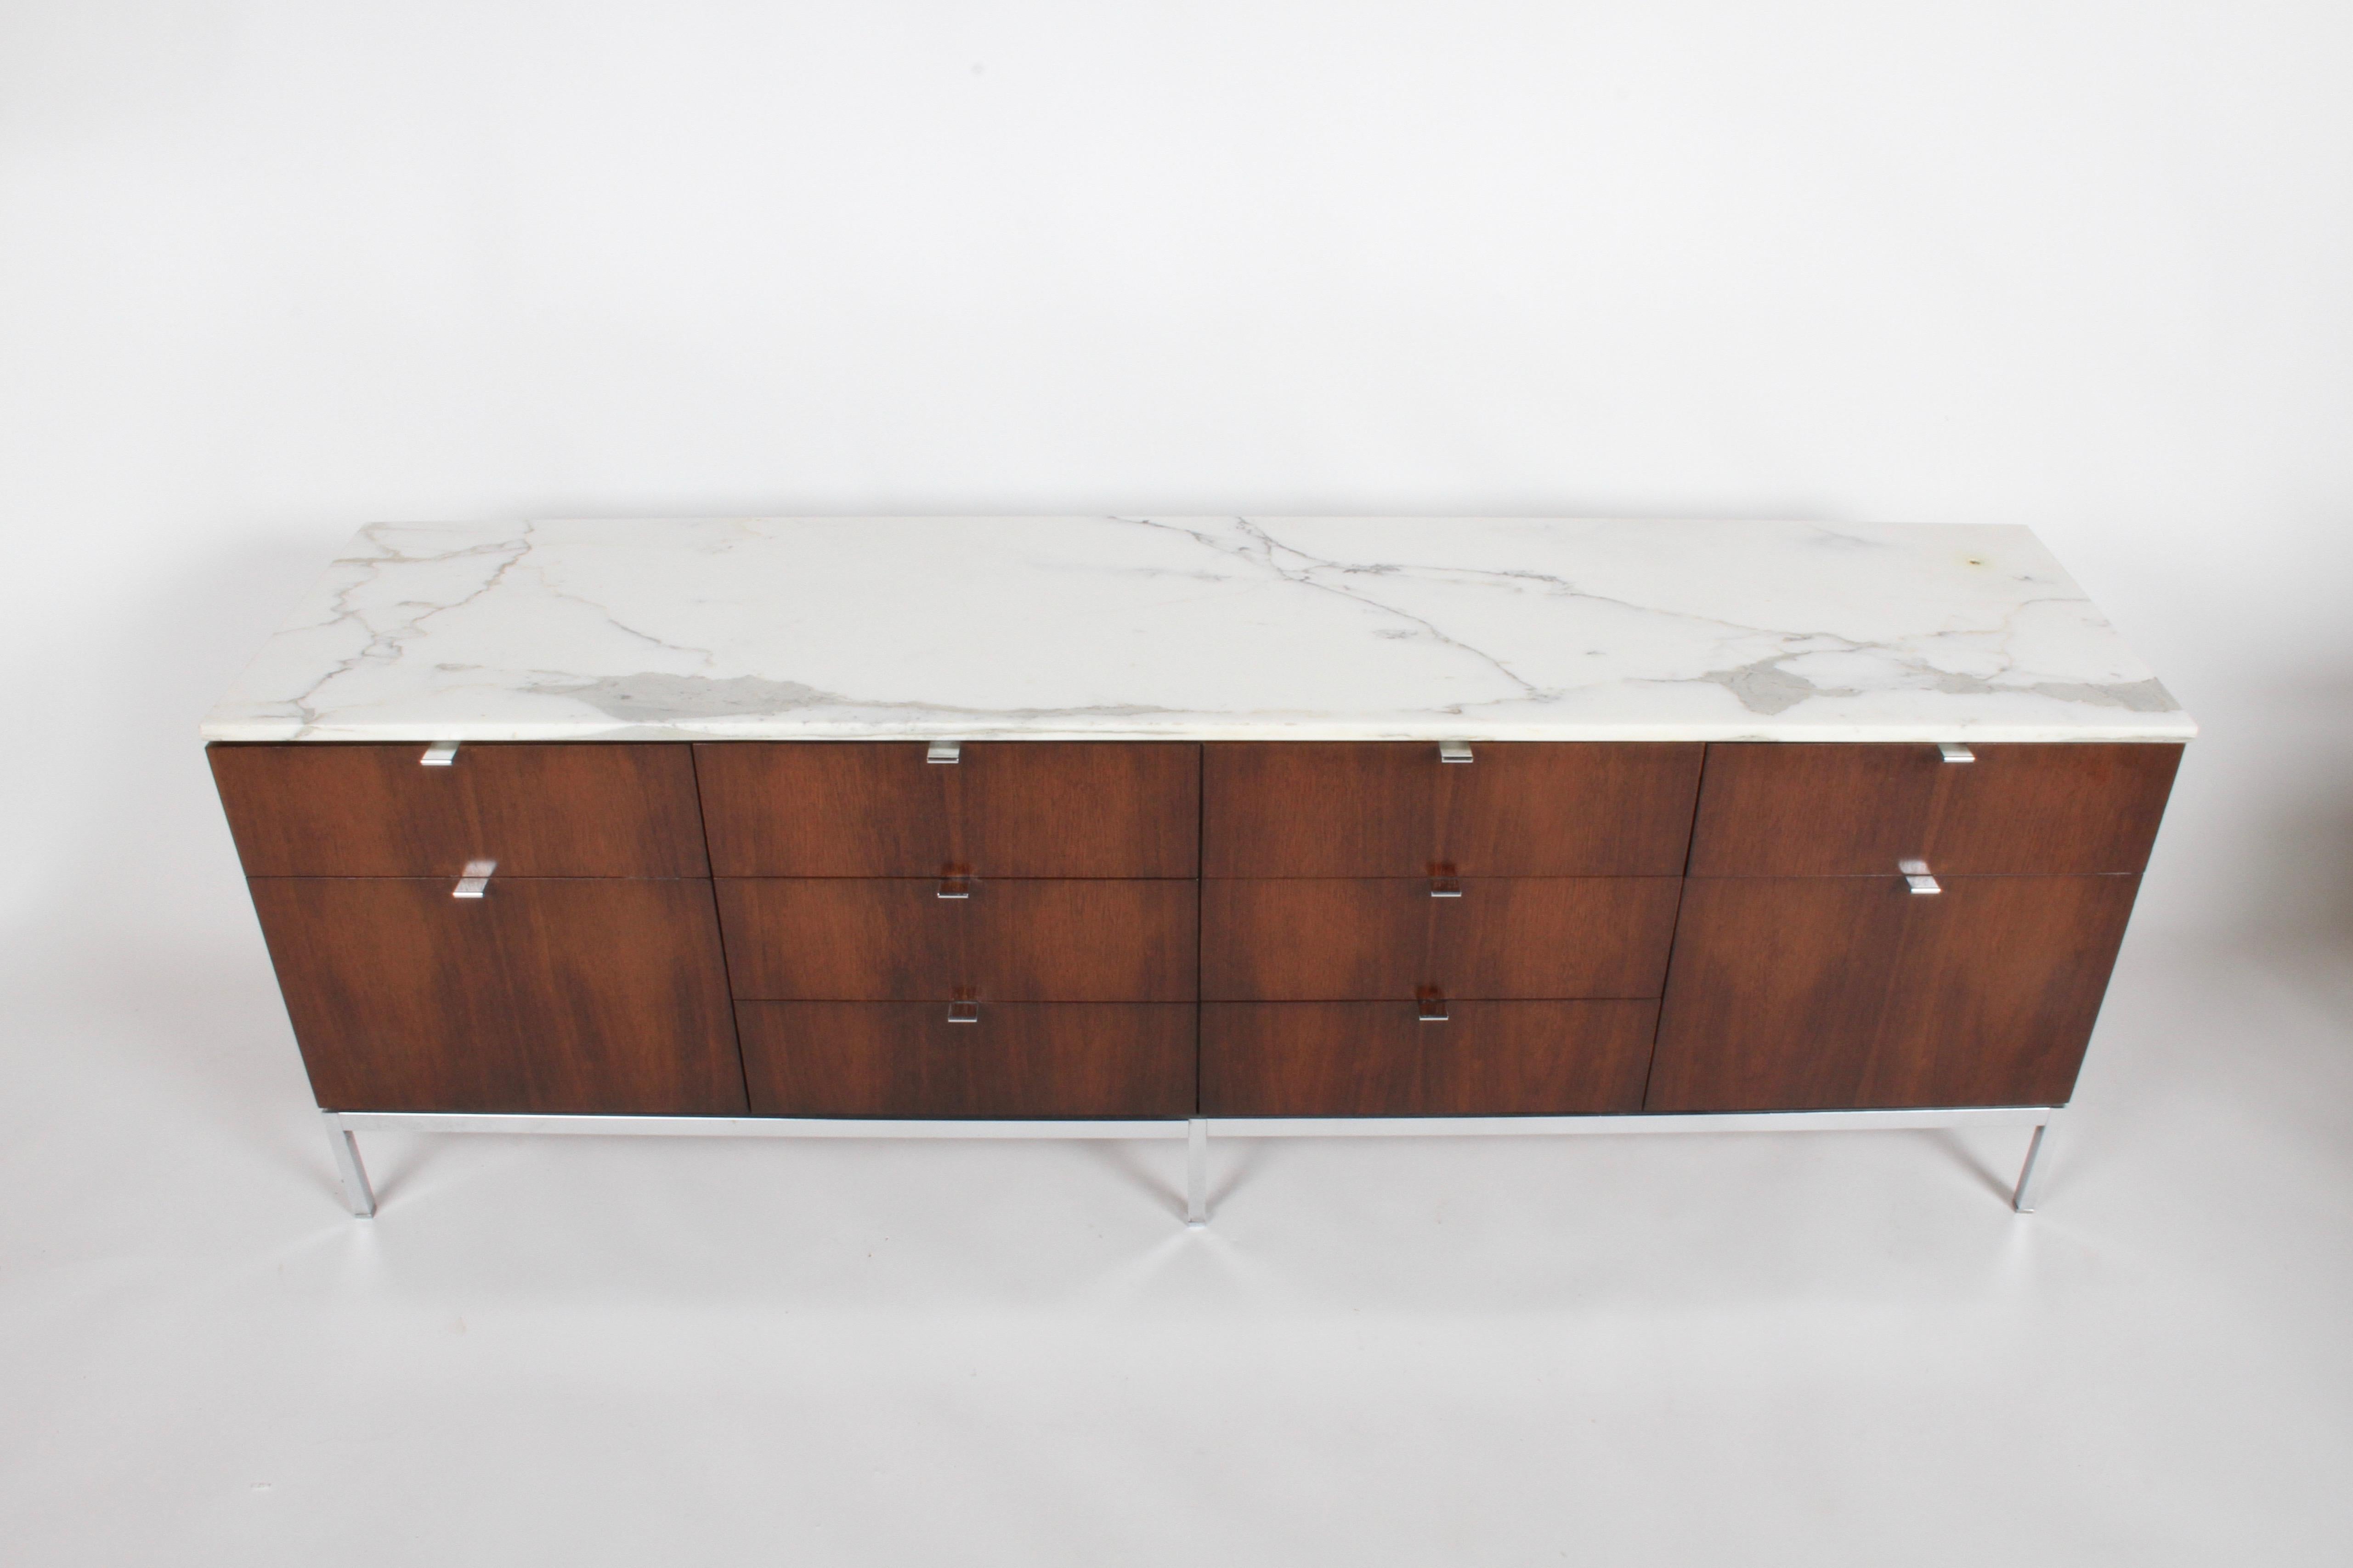 Florence Knoll credenza in rosewood, drawer fronts are book matched with beautiful Calacatta marble top. The 10 drawer Rosewood cabinet has been restored, chrome pulls and base polish, showing only light patina. Calacatta top is free of cracks, but